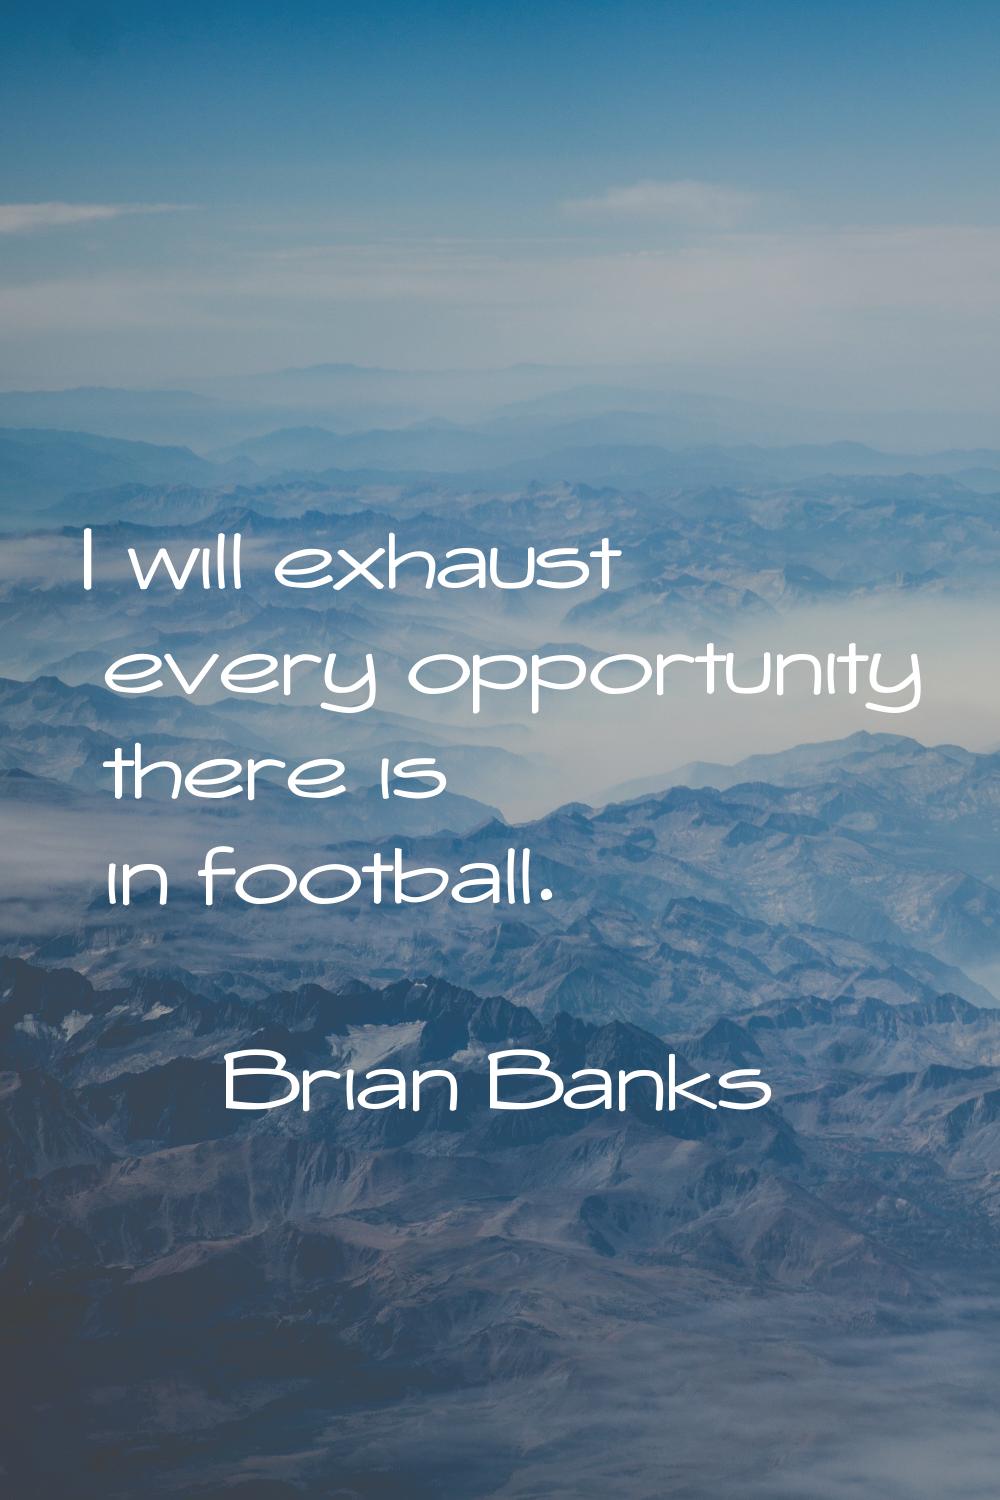 I will exhaust every opportunity there is in football.